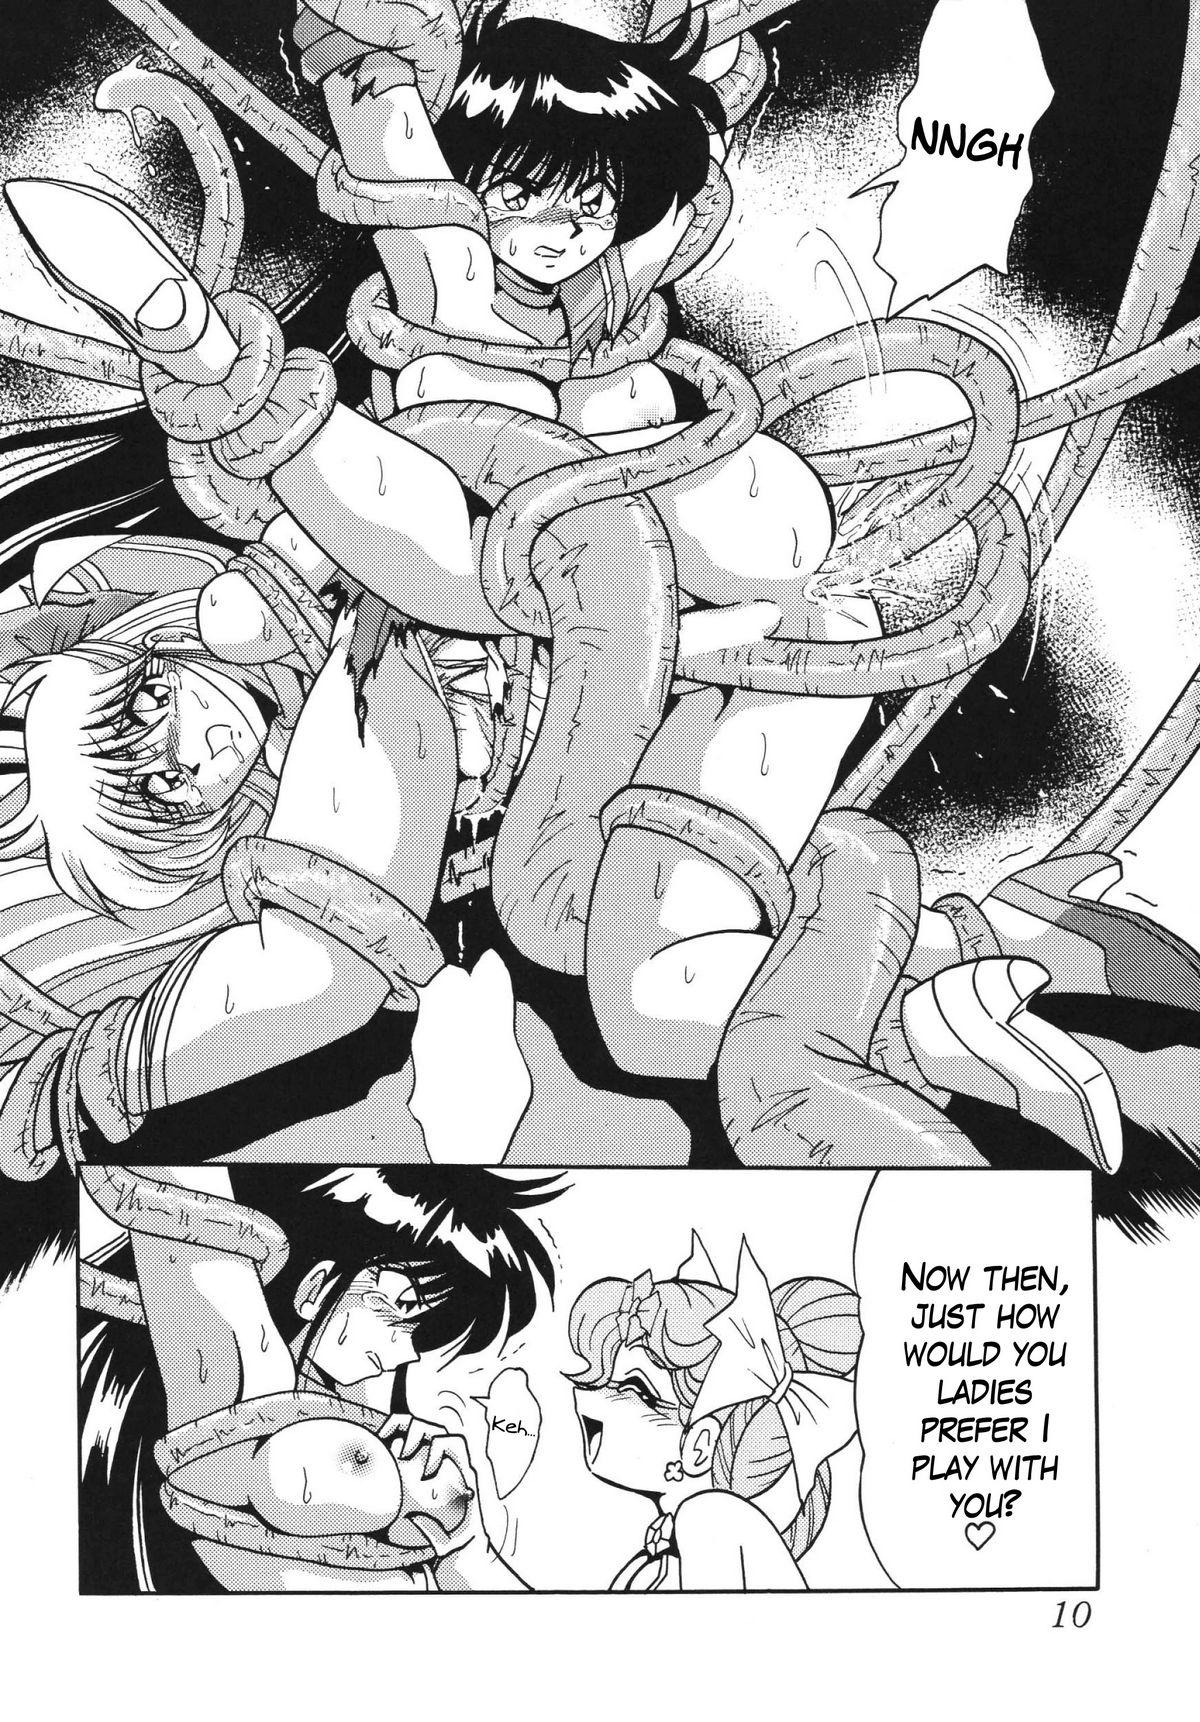 France Silent Saturn SS vol. 5 - Sailor moon Twistys - Page 10